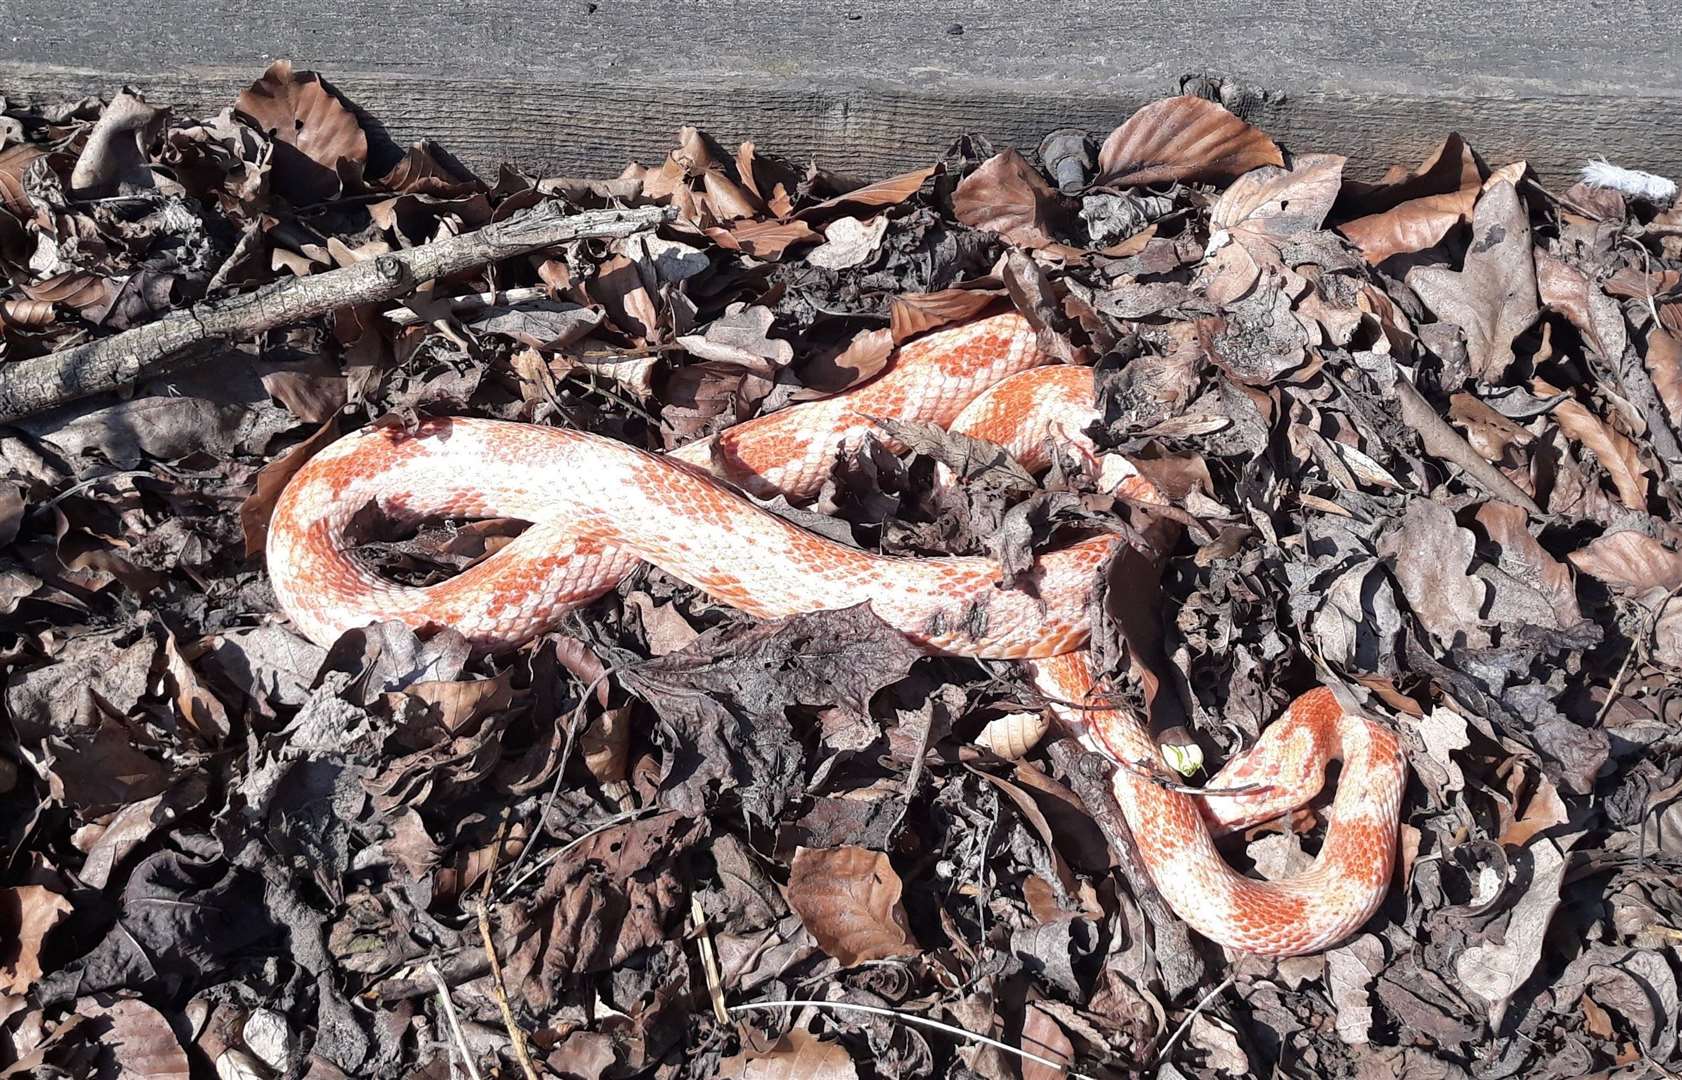 The corn snake was about 2ft long and 20mm wide. Stock picture